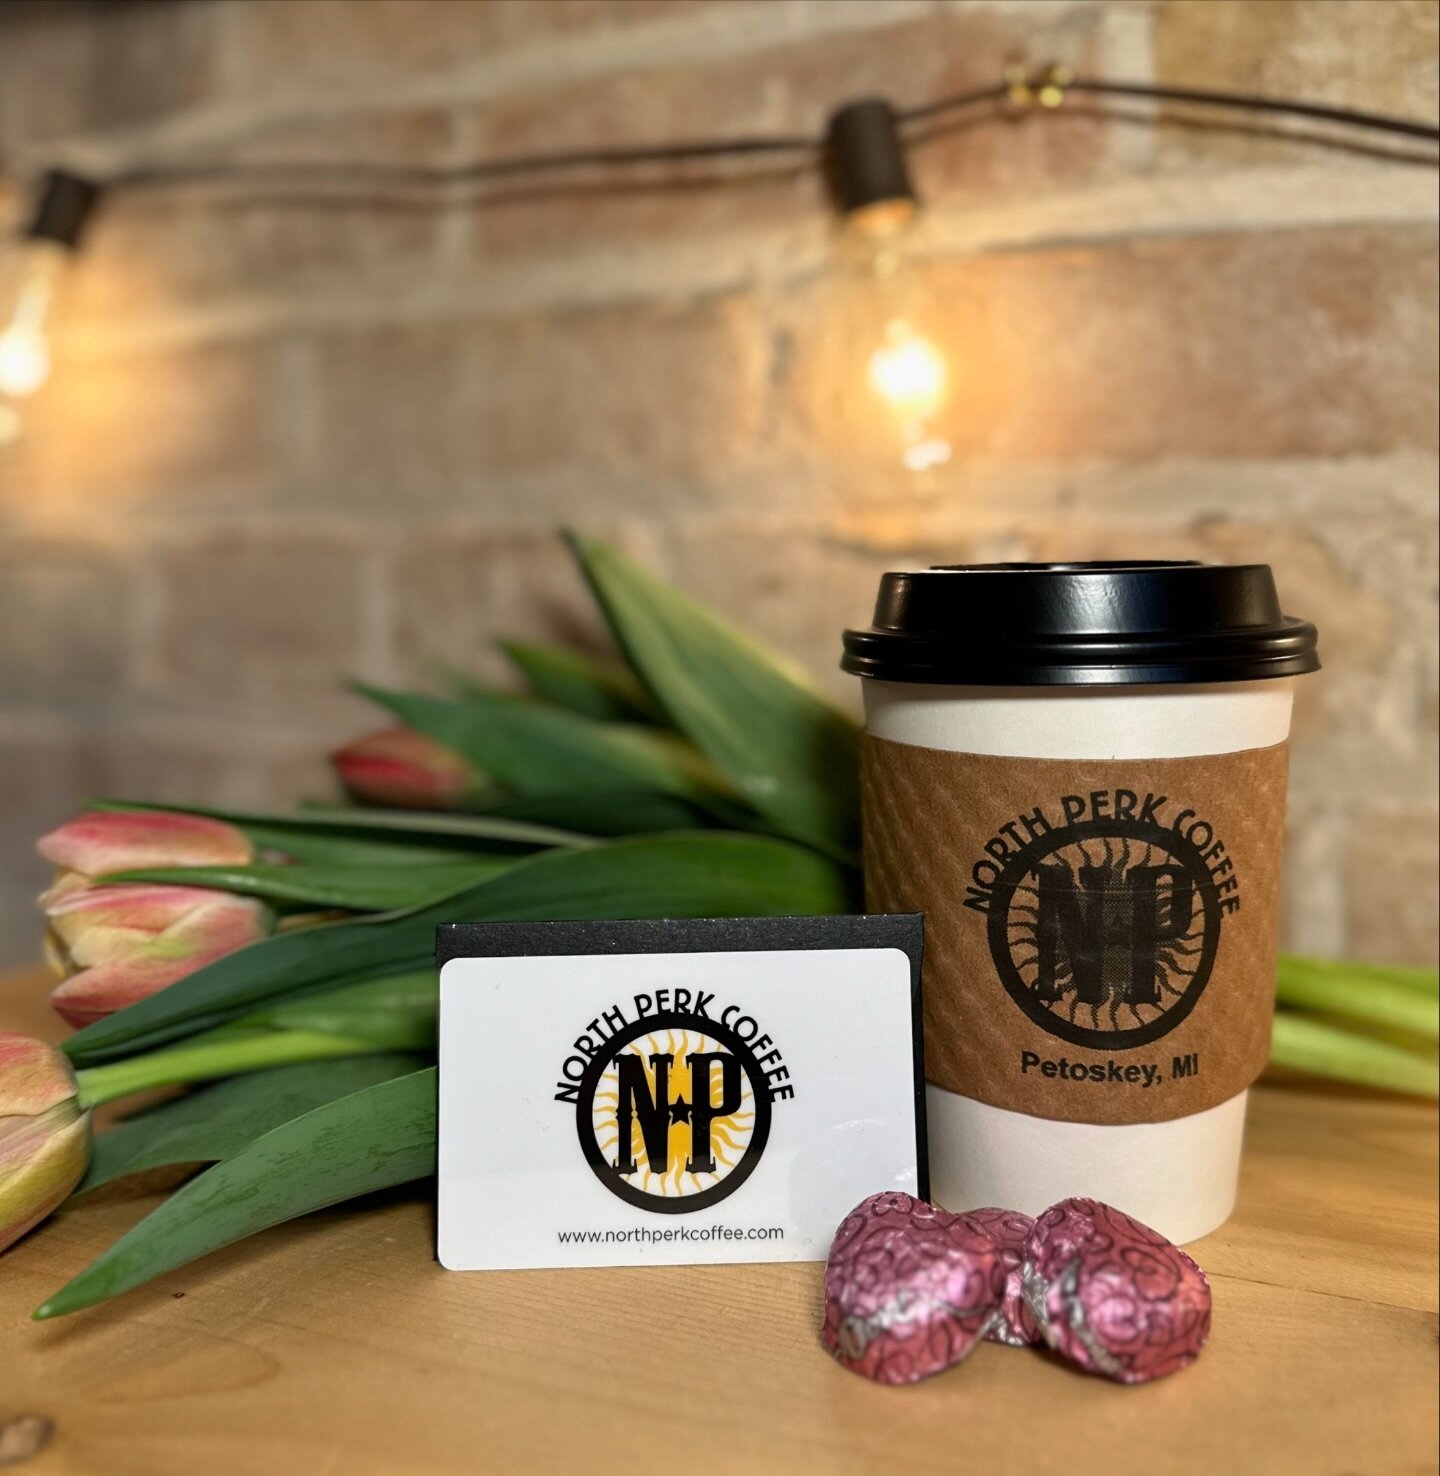 Great Valentine&rsquo;s Gift Combo! 💐☕️🍫 
The gift of coffee goes with anything and never disappoints &hellip; we have gift certificates in any amount for that special someone ❤️

@downtownpetoskey @petoskeyarea @northperkcoffee #northperkcoffee #s